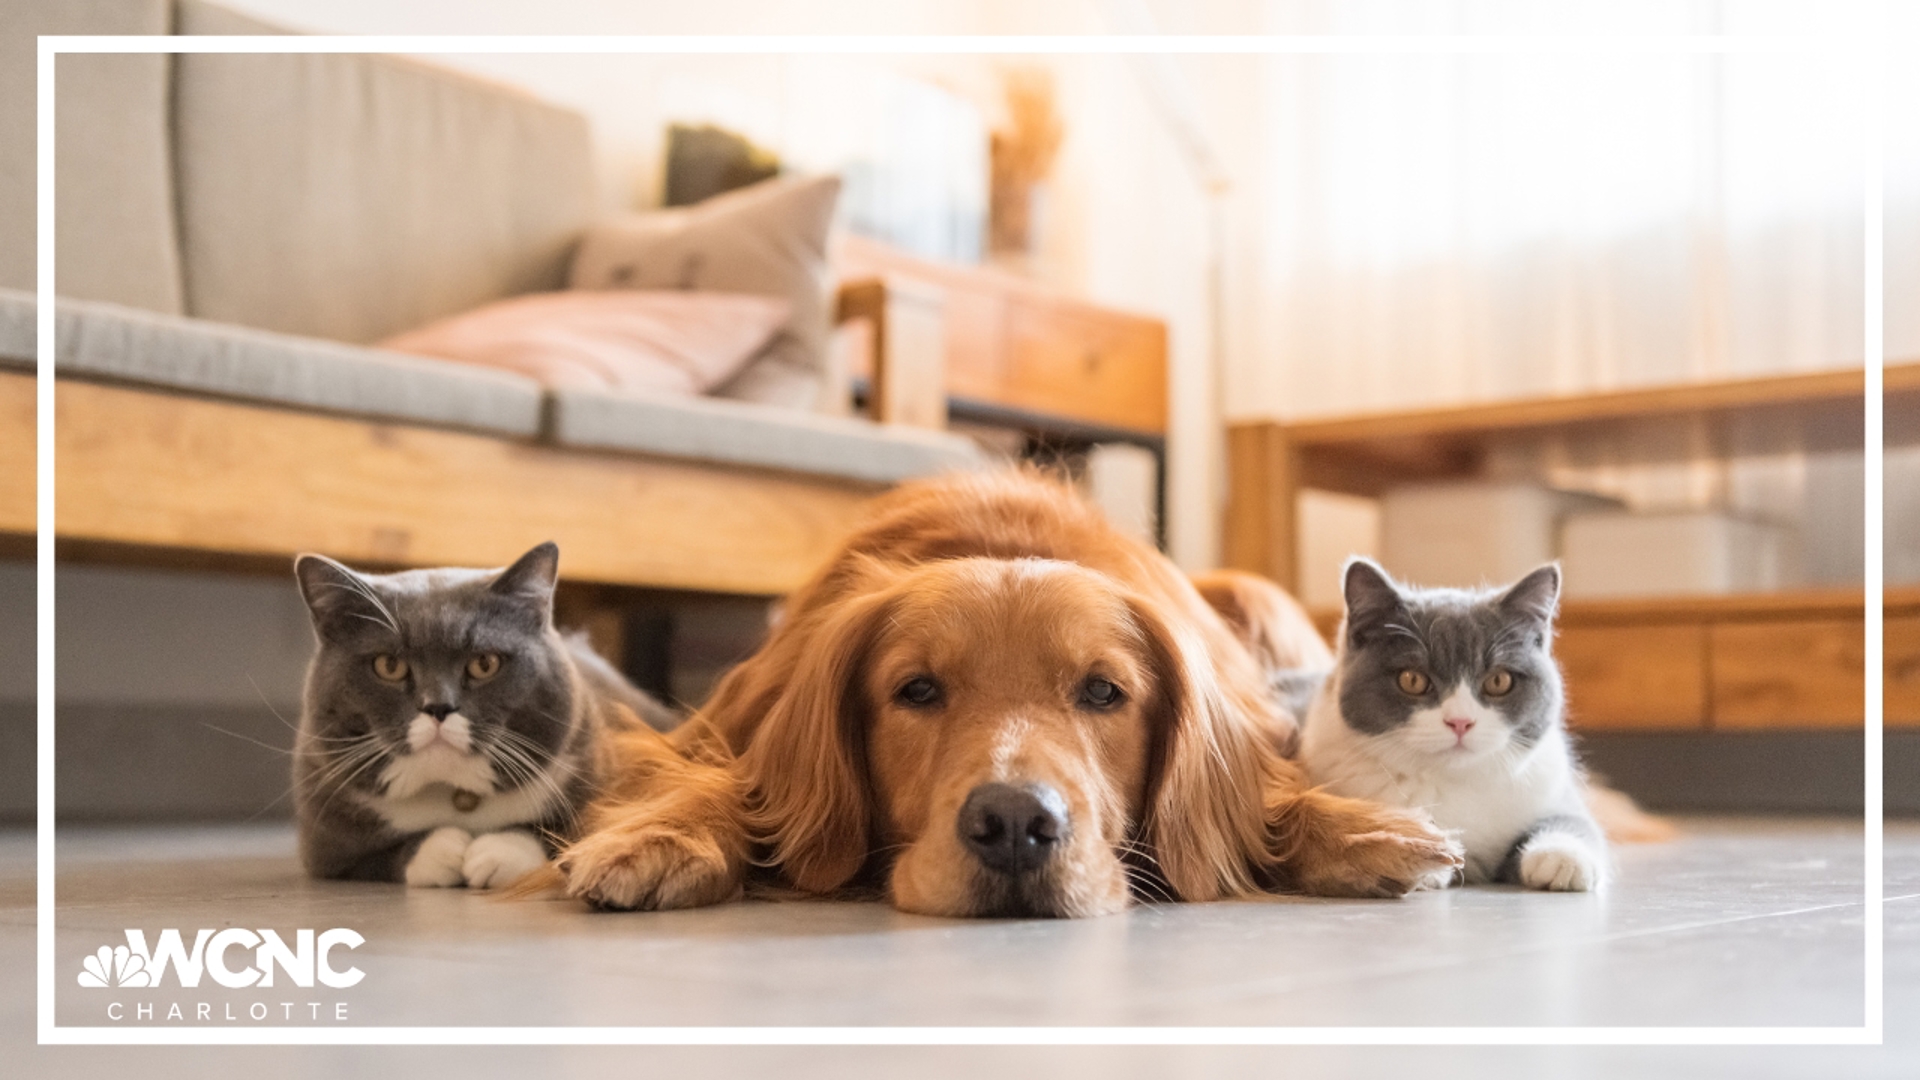 There's a lot to consider whether you're bringing your pets with you or leaving them with a trusted person during severe weather.